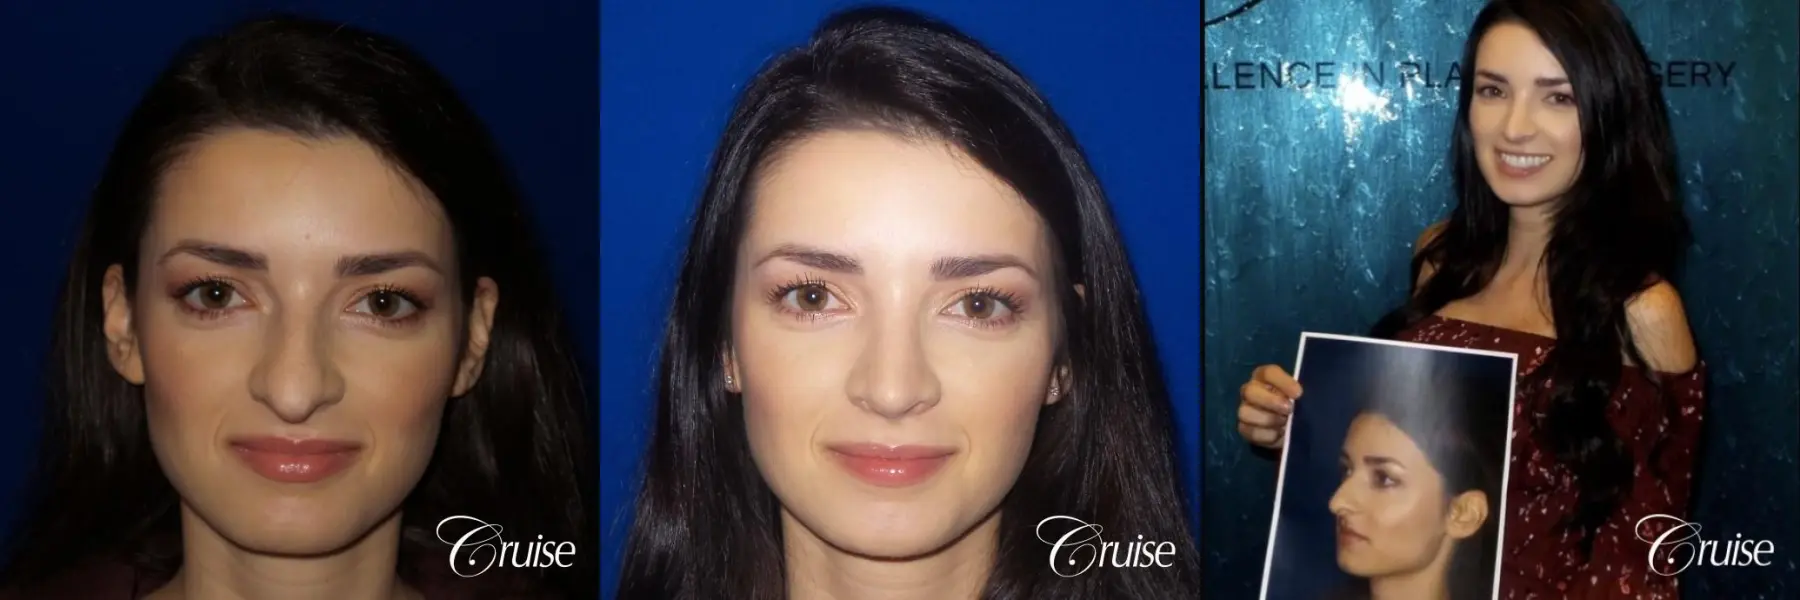 Rhinoplasty specialist Orange County CA - Before and After 1